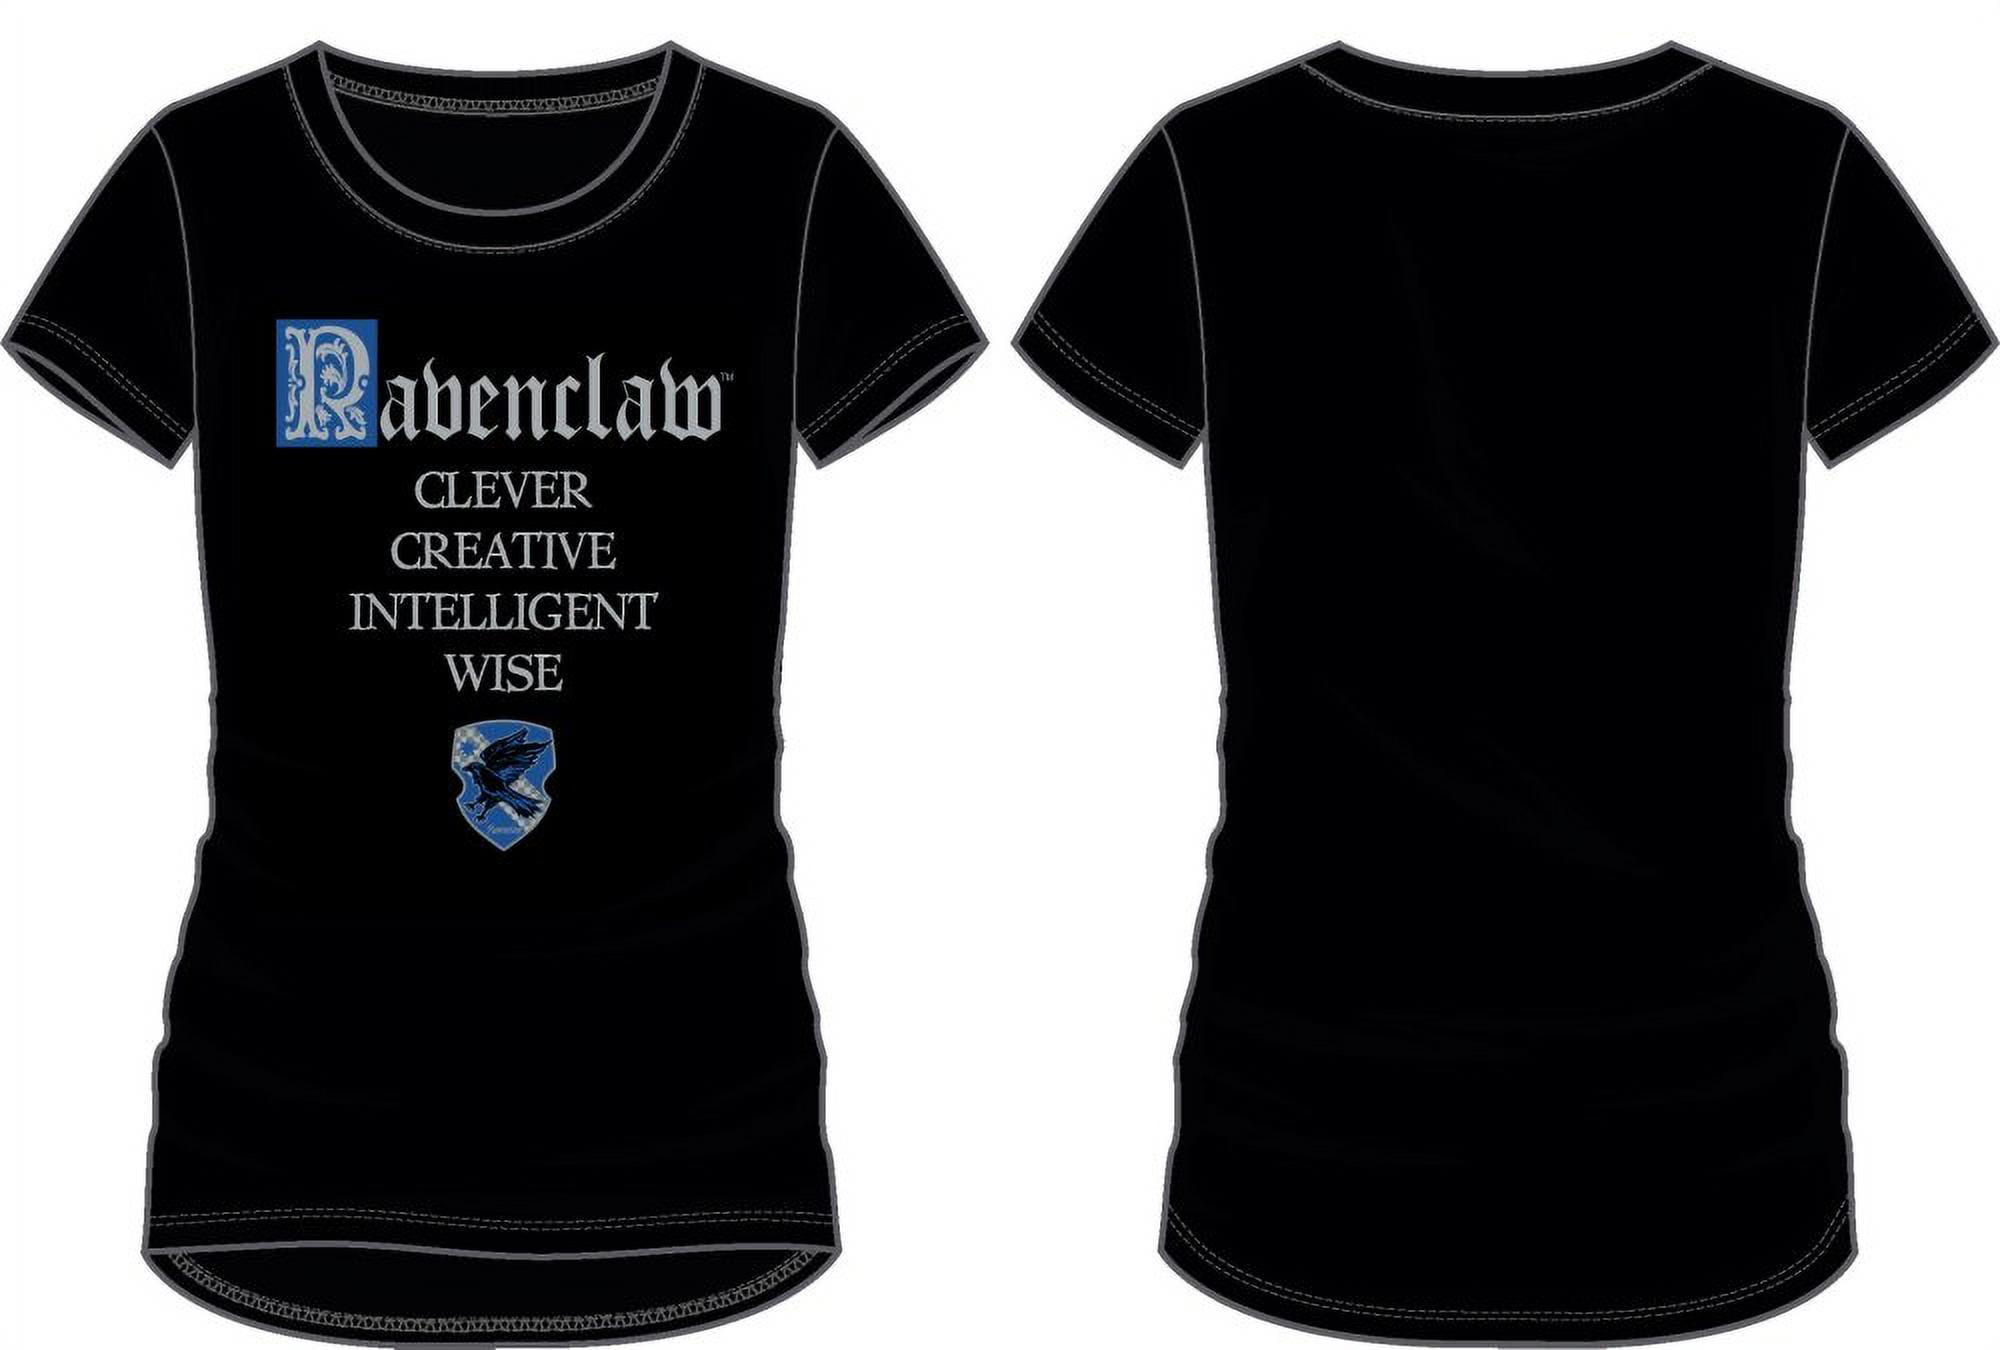 Crest Black House of Intelligent Characteristics & Harry Wise Ravenclaw T-Shirt Shirt-Small Tee Clever Creative Juniors Potter